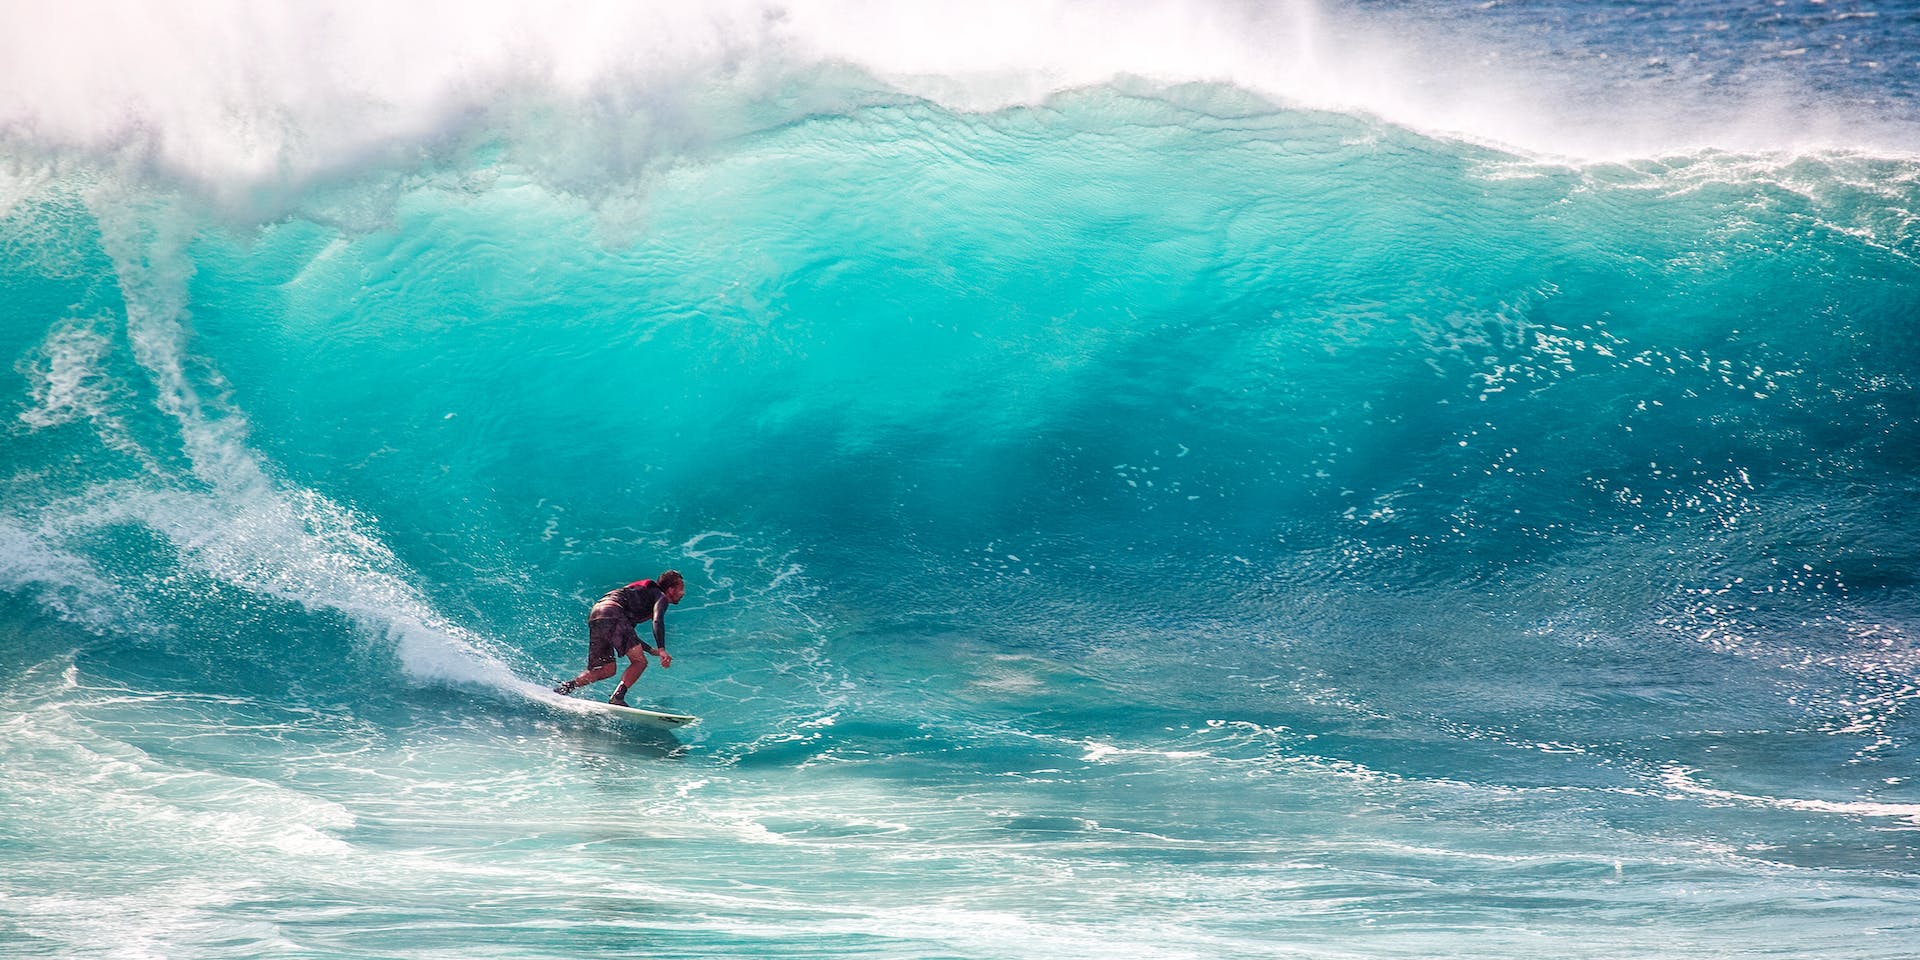 A hero image for the footer area of the Strive Peptides website showing a surfer in a bluish green ripcurl wave